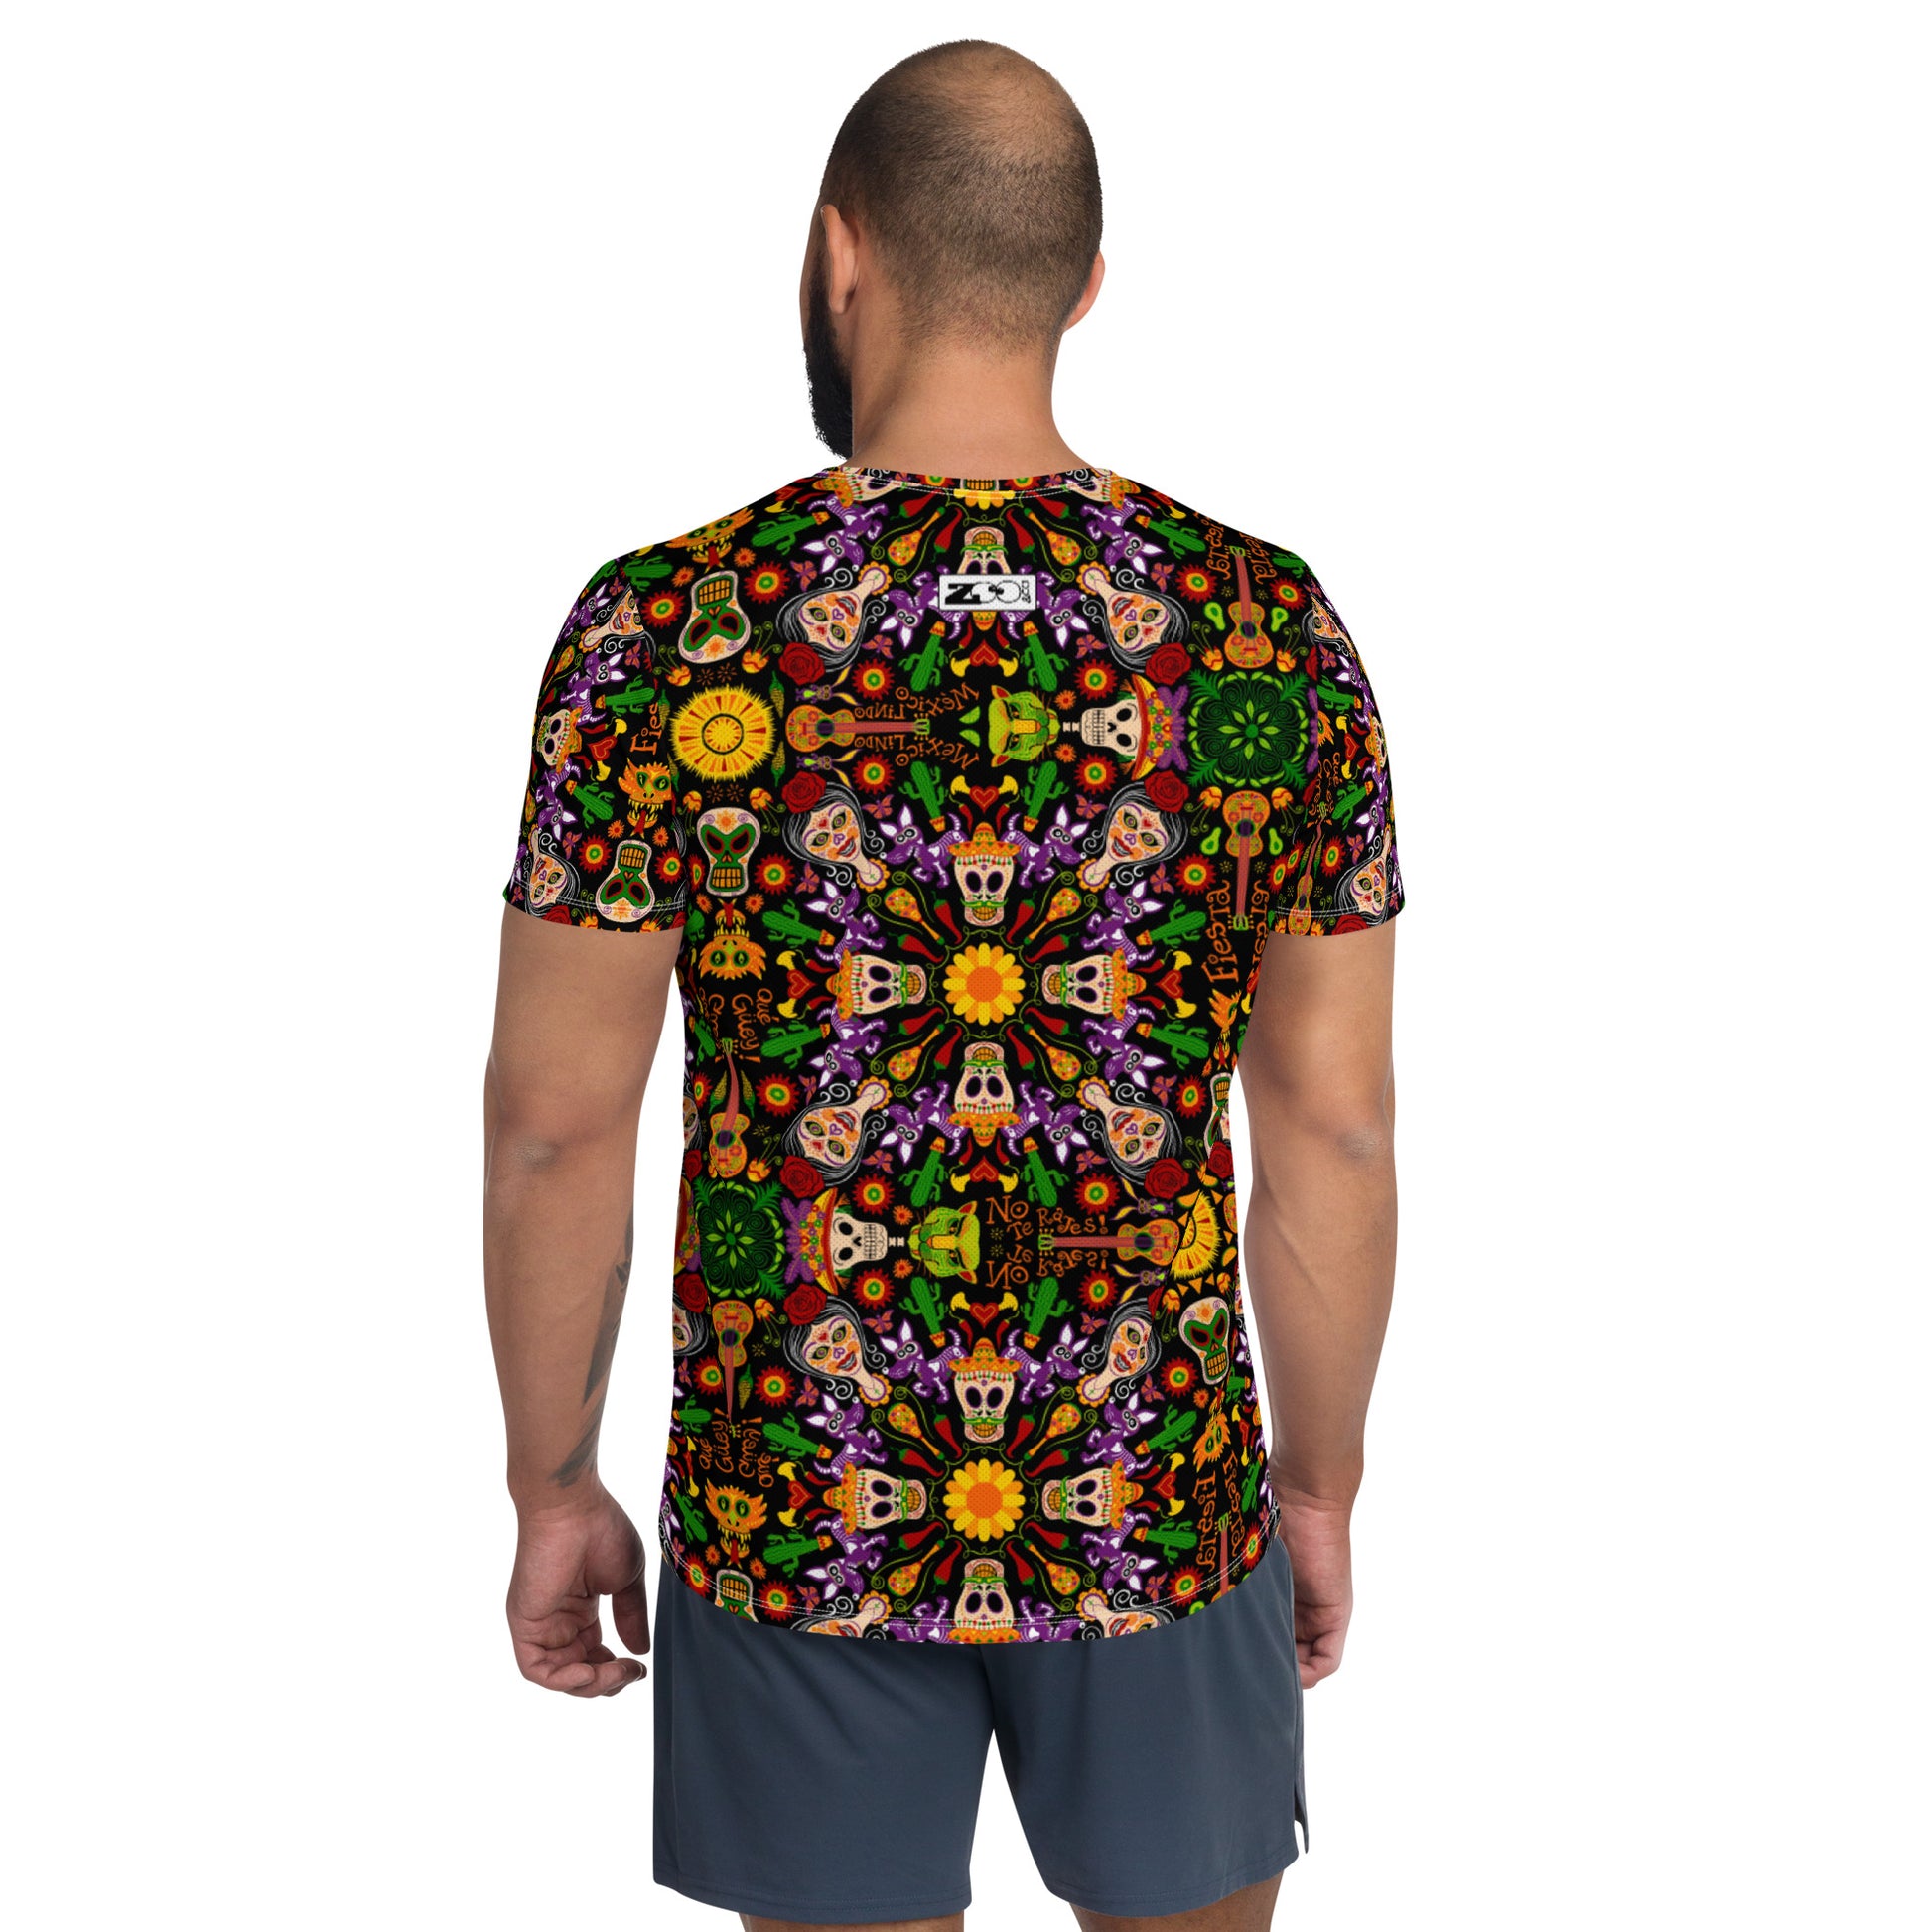 Mexican skulls celebrating the Day of the dead All-Over Print Men's Athletic T-shirt. Back view